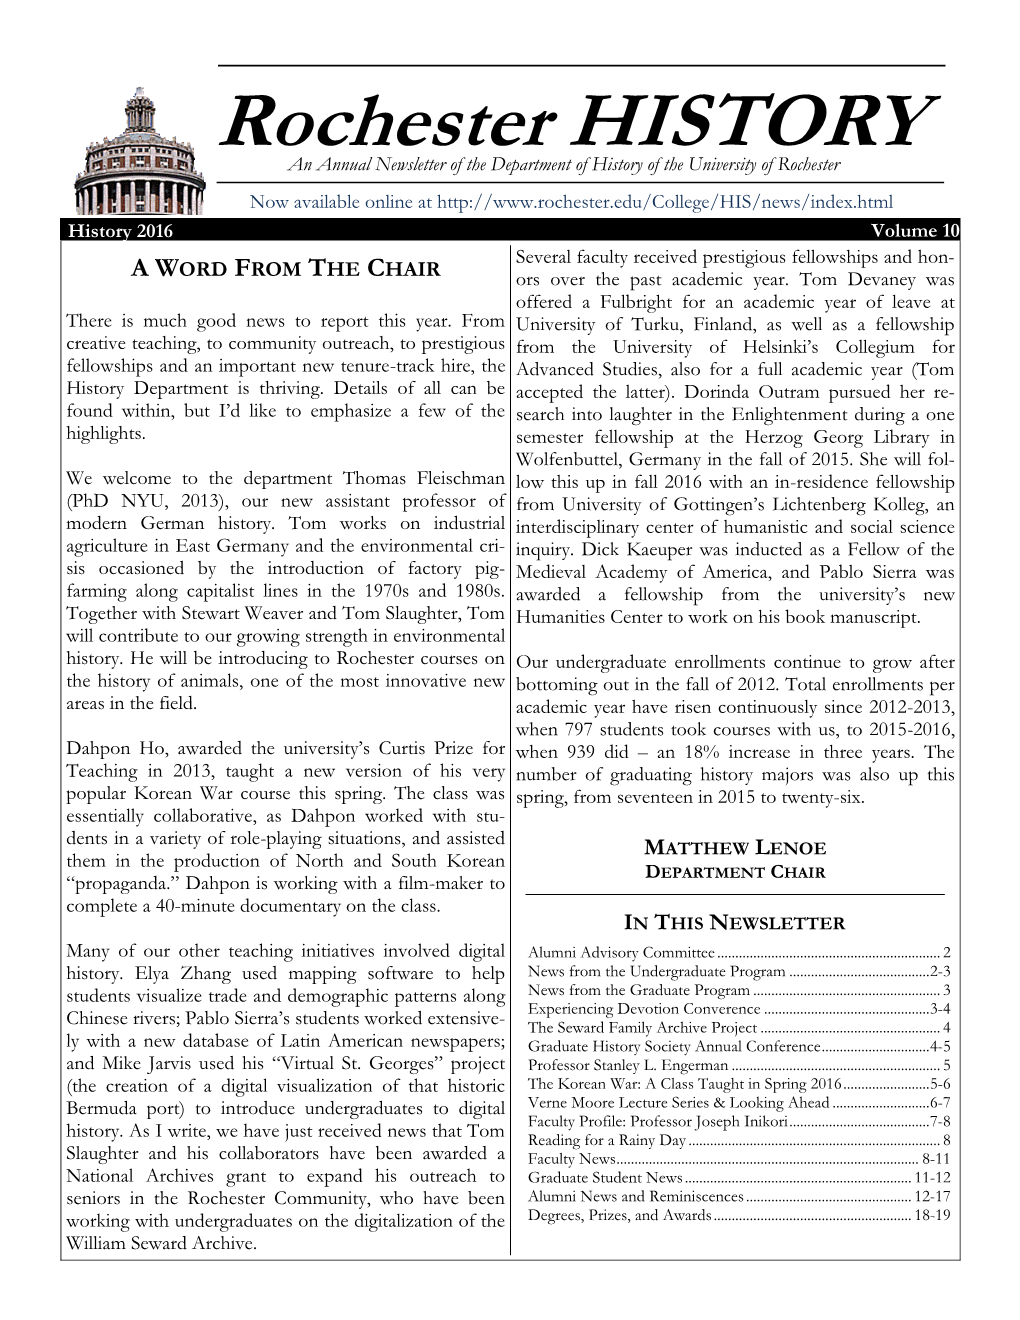 Rochester HISTORY an Annual Newsletter of the Department of History of the University of Rochester